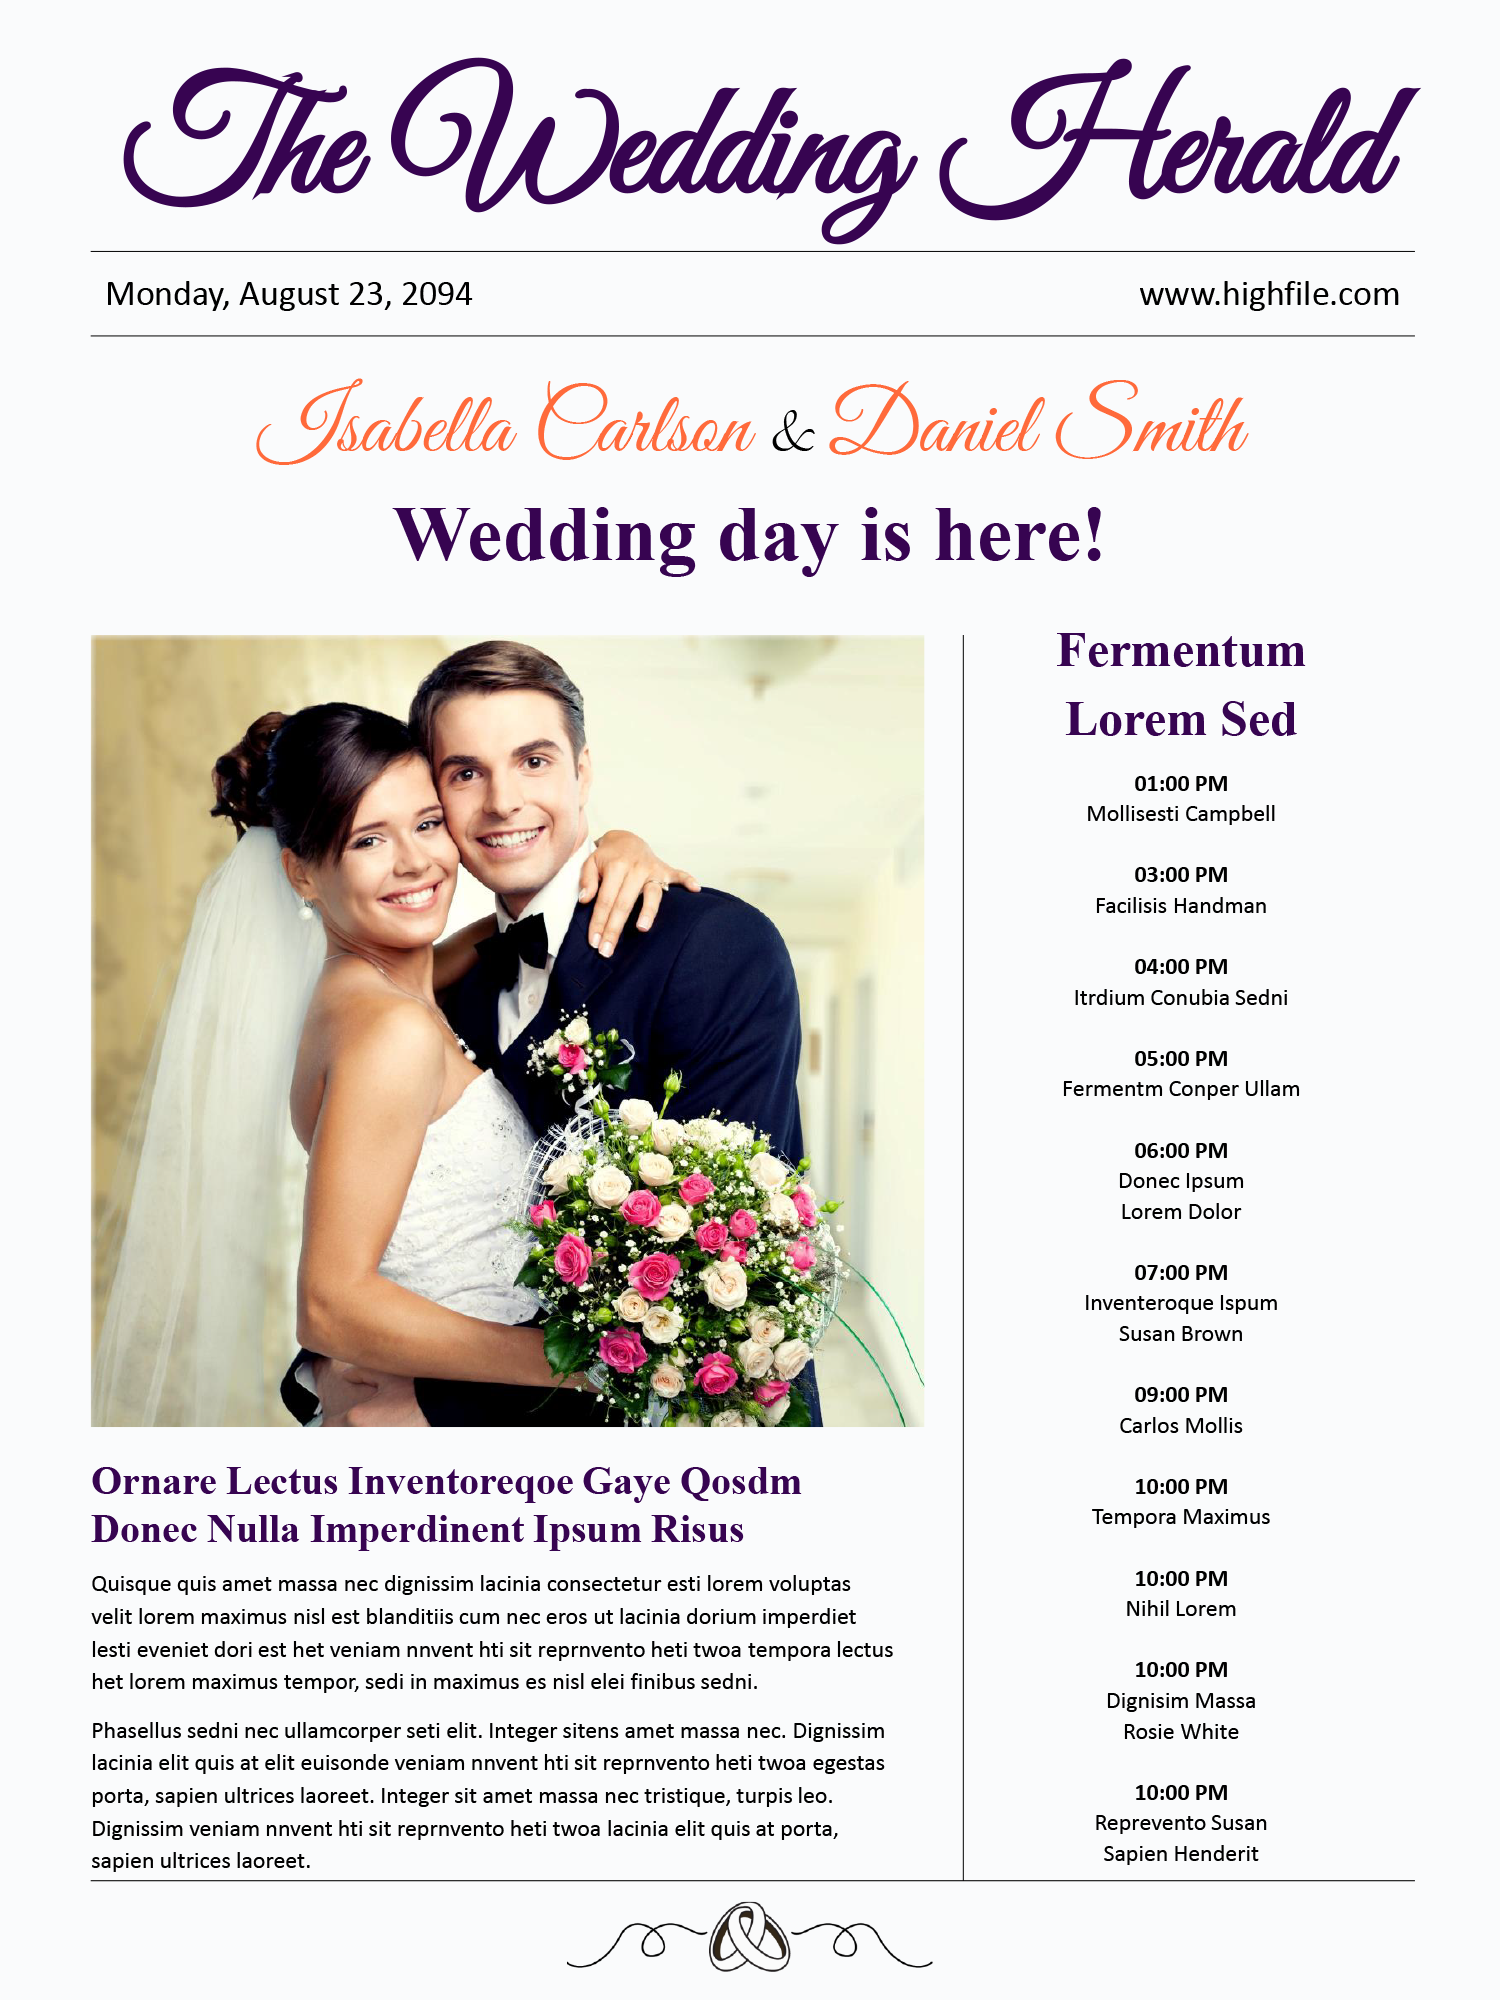 A3 Wedding Program Newspaper Template - Front Page